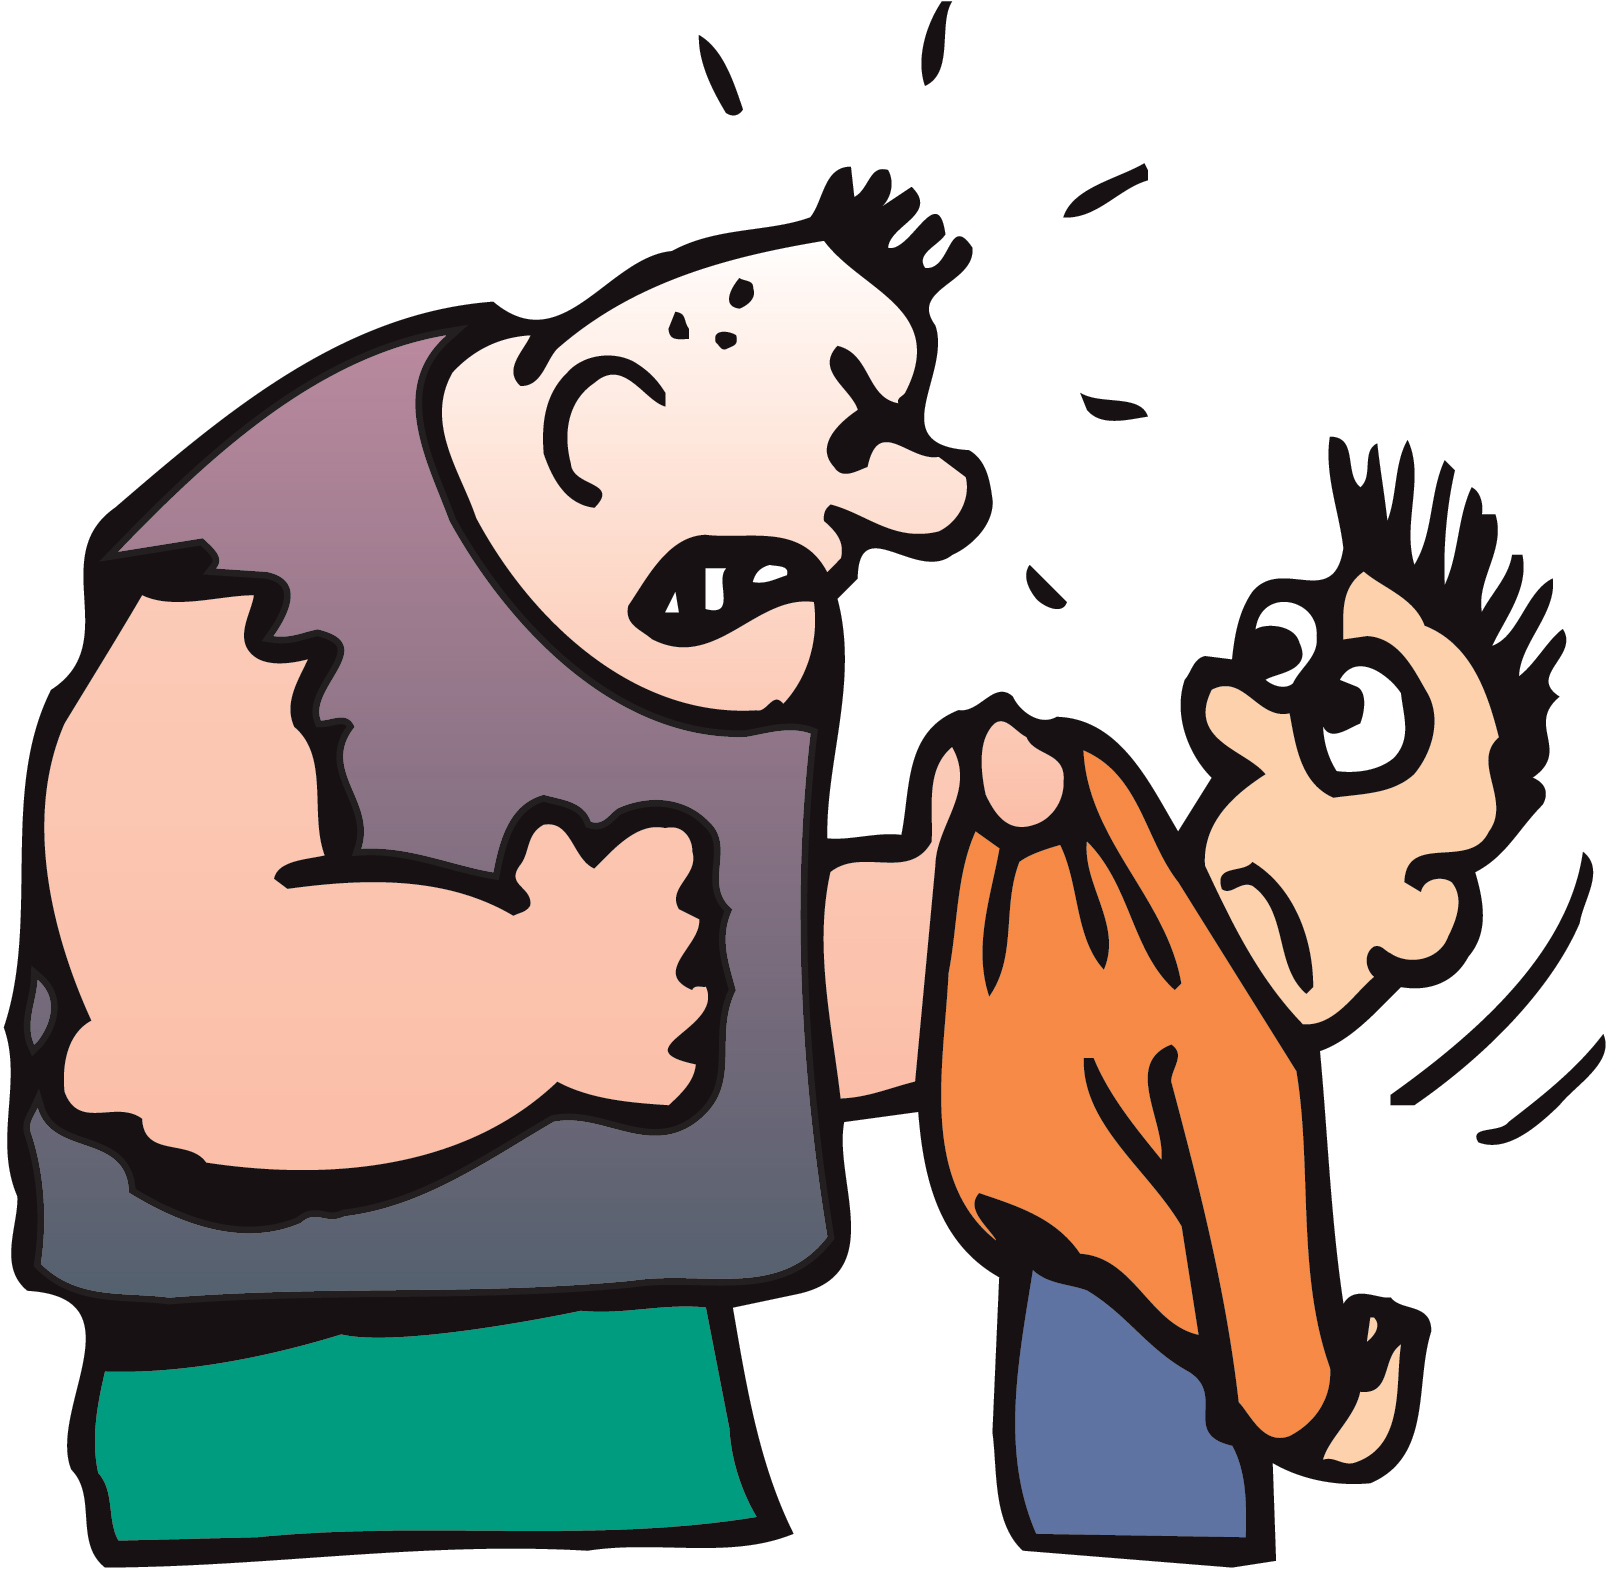 Free Bullying Cliparts, Download Free Clip Art, Free Clip.